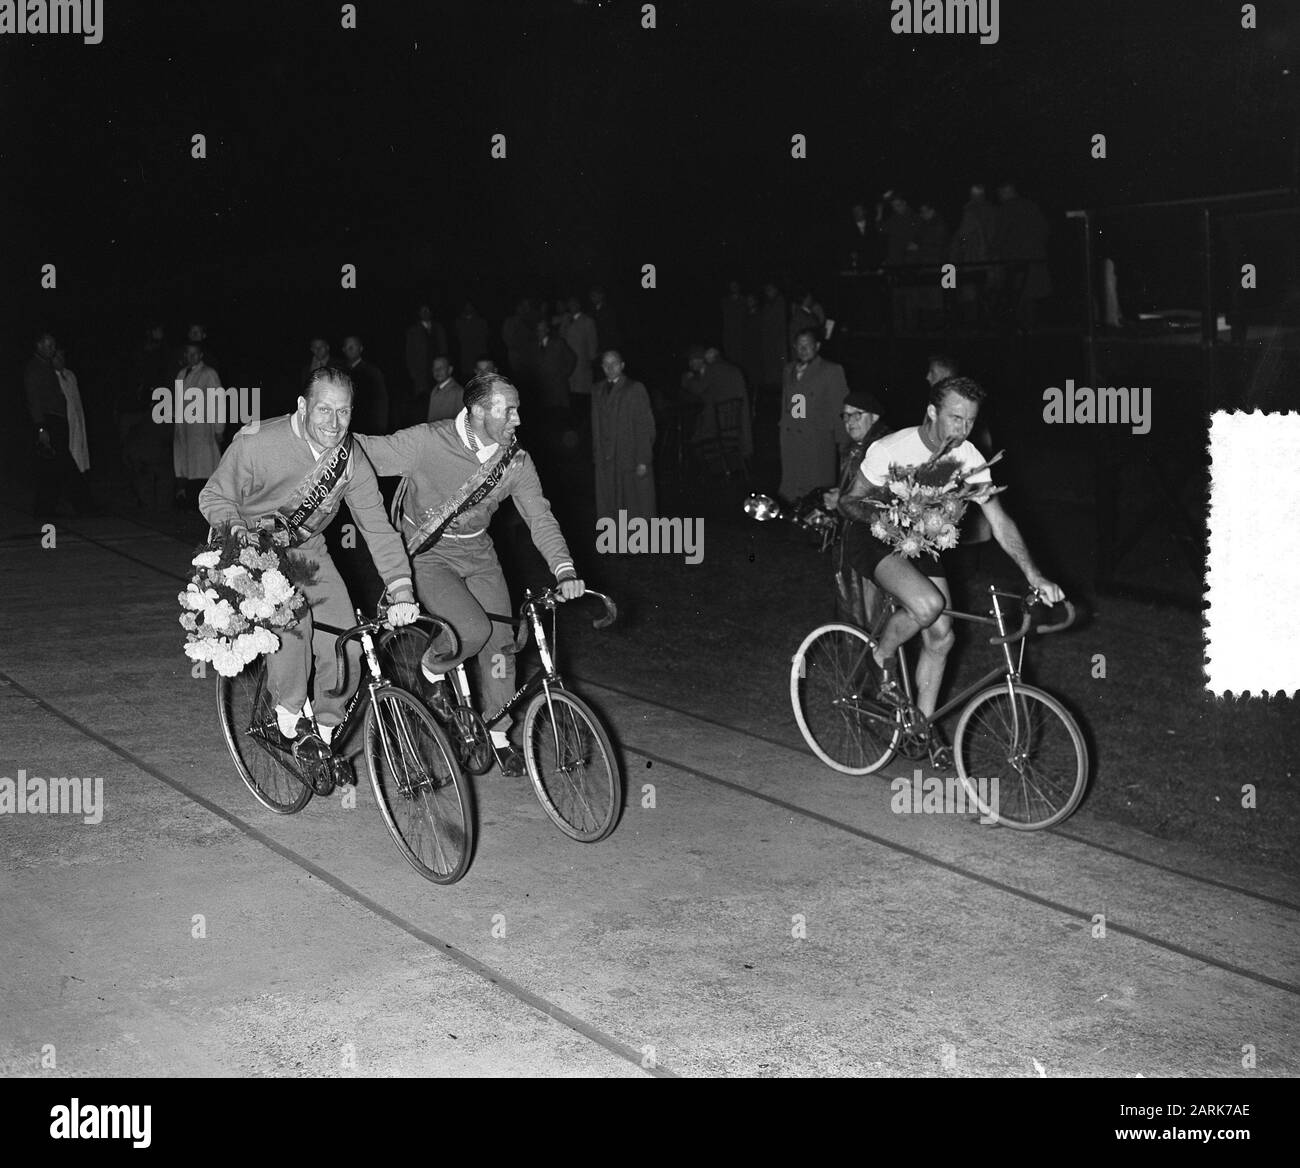 Cycling race for big prize Amsterdam, honorary round Derkse Pronk, French Date: September 16, 1954 Location: Amsterdam, Noord-Holland Keywords: PRICE, honorary rounds, cycling races Personal name: Derksen, FRENCH Stock Photo